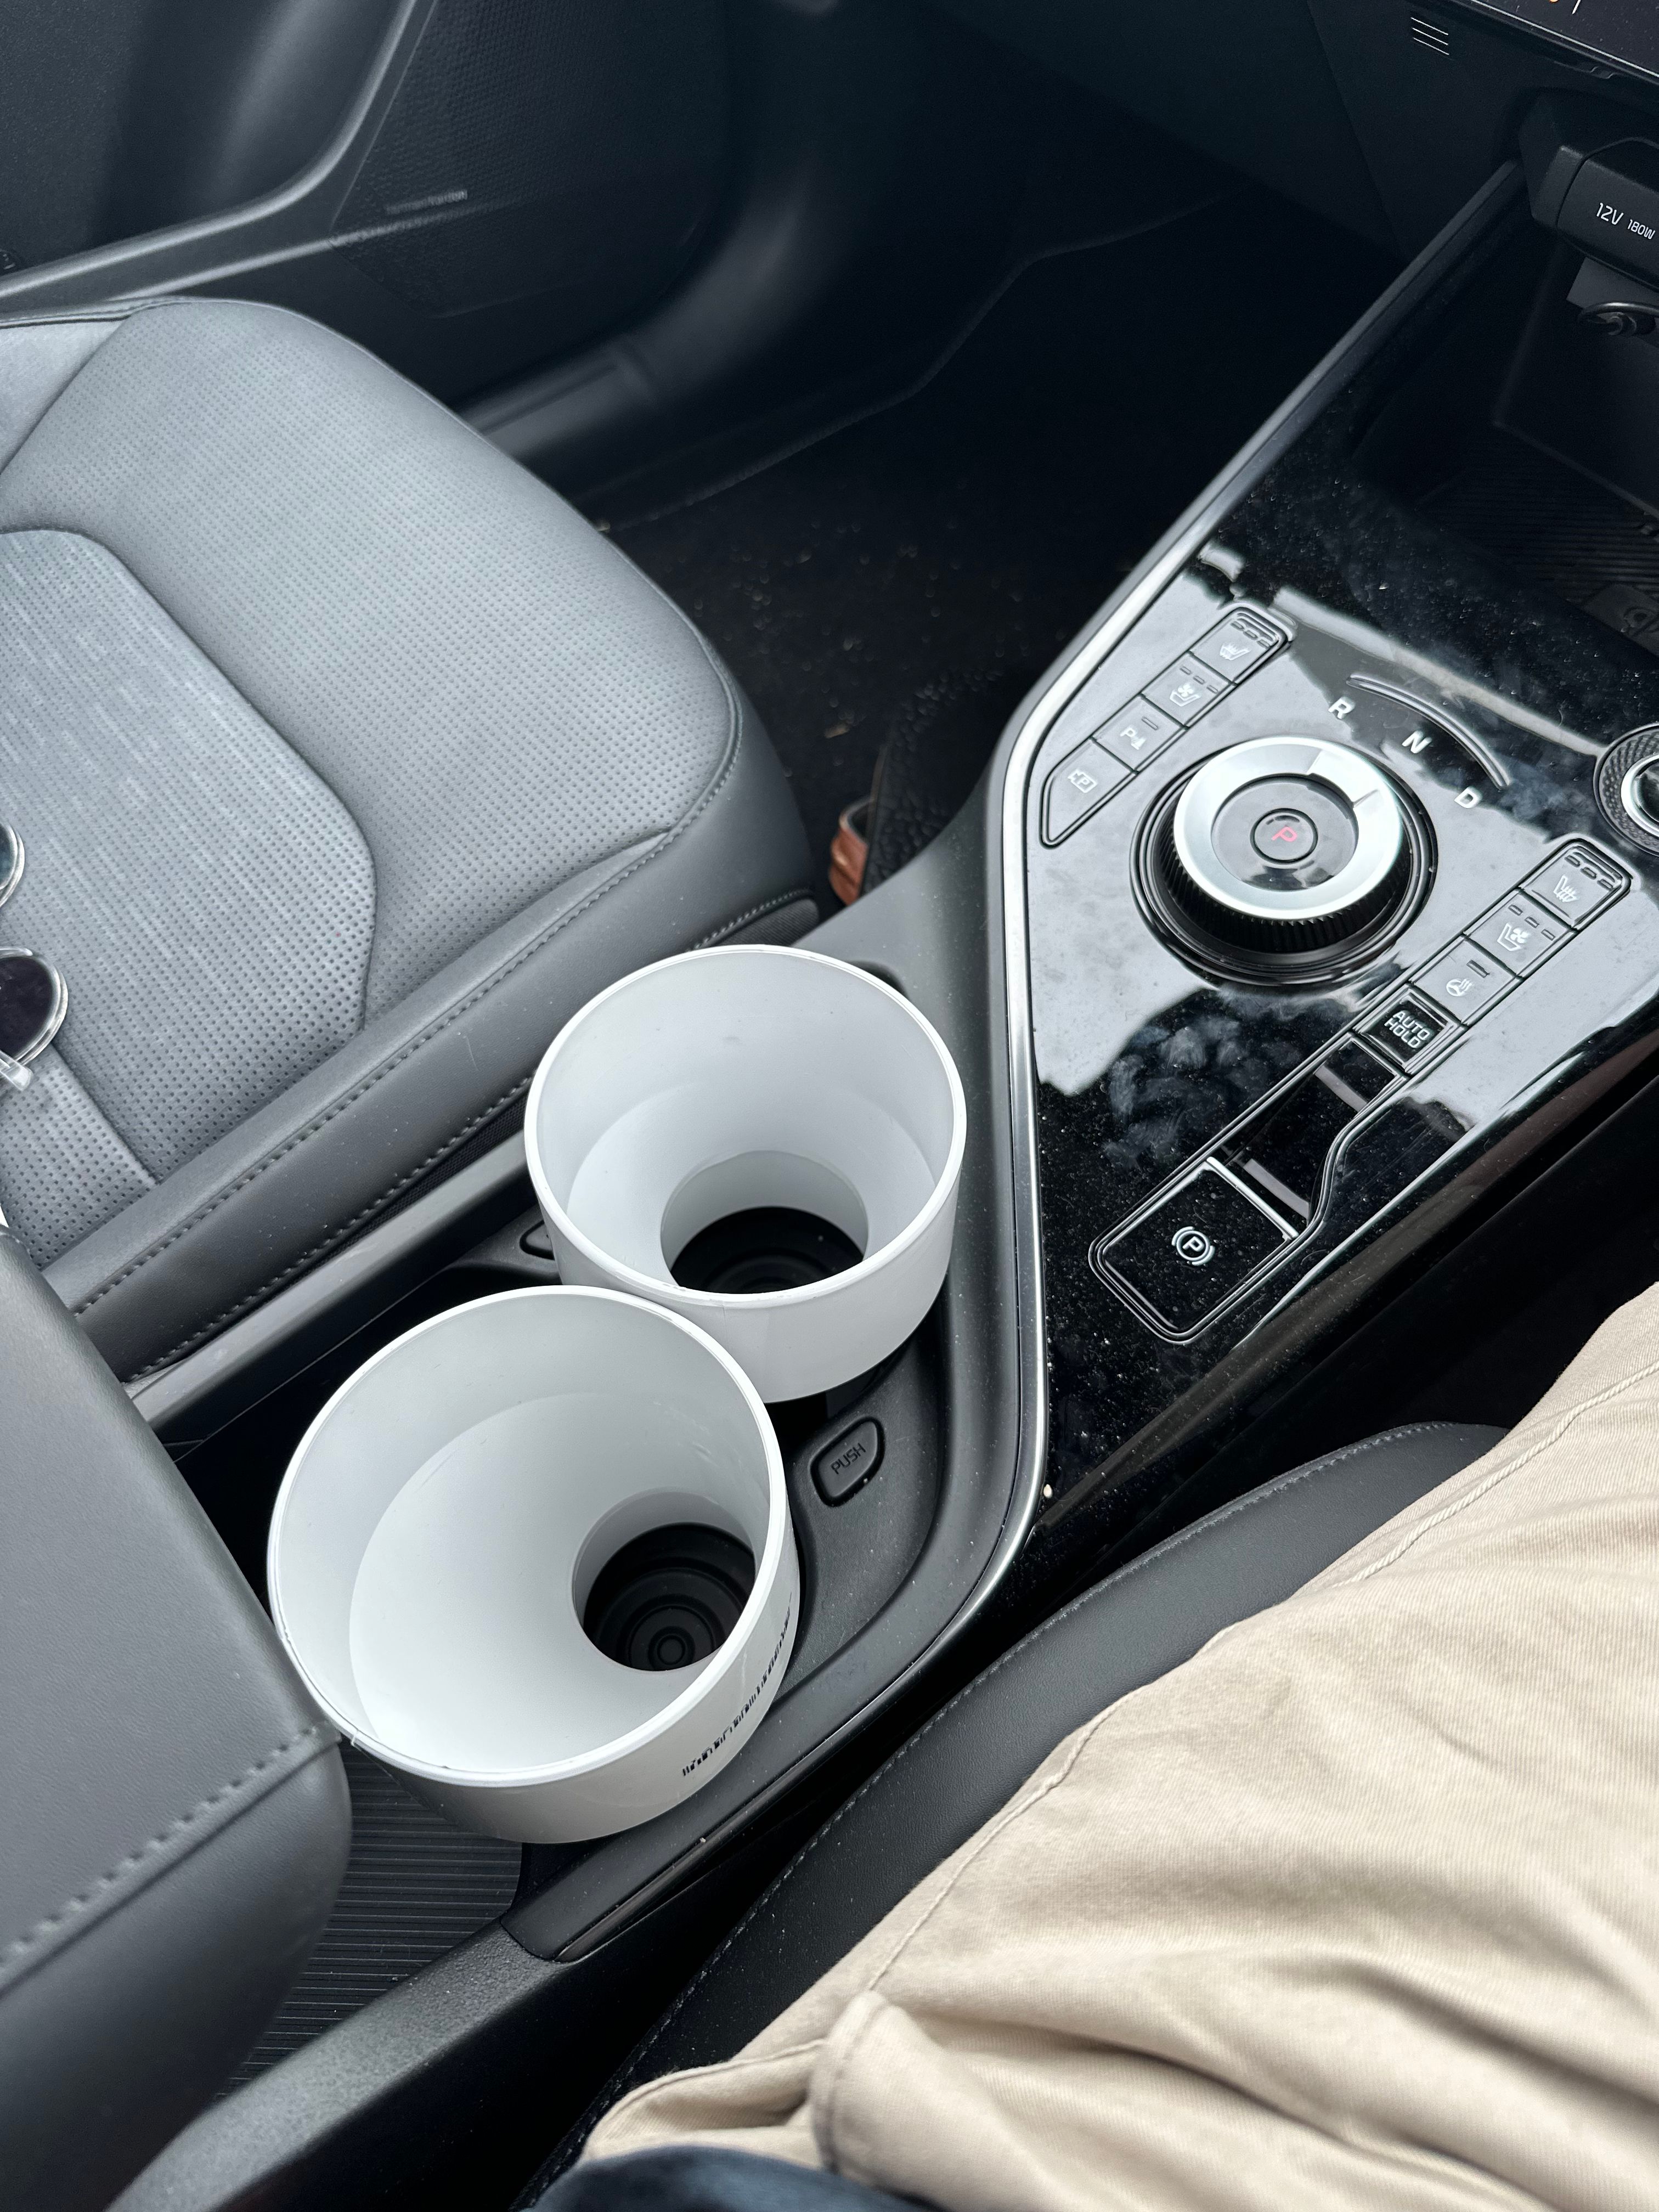 Auto Cup Holder Extender  Car cup holder, Coffee cup holder, Diy cups